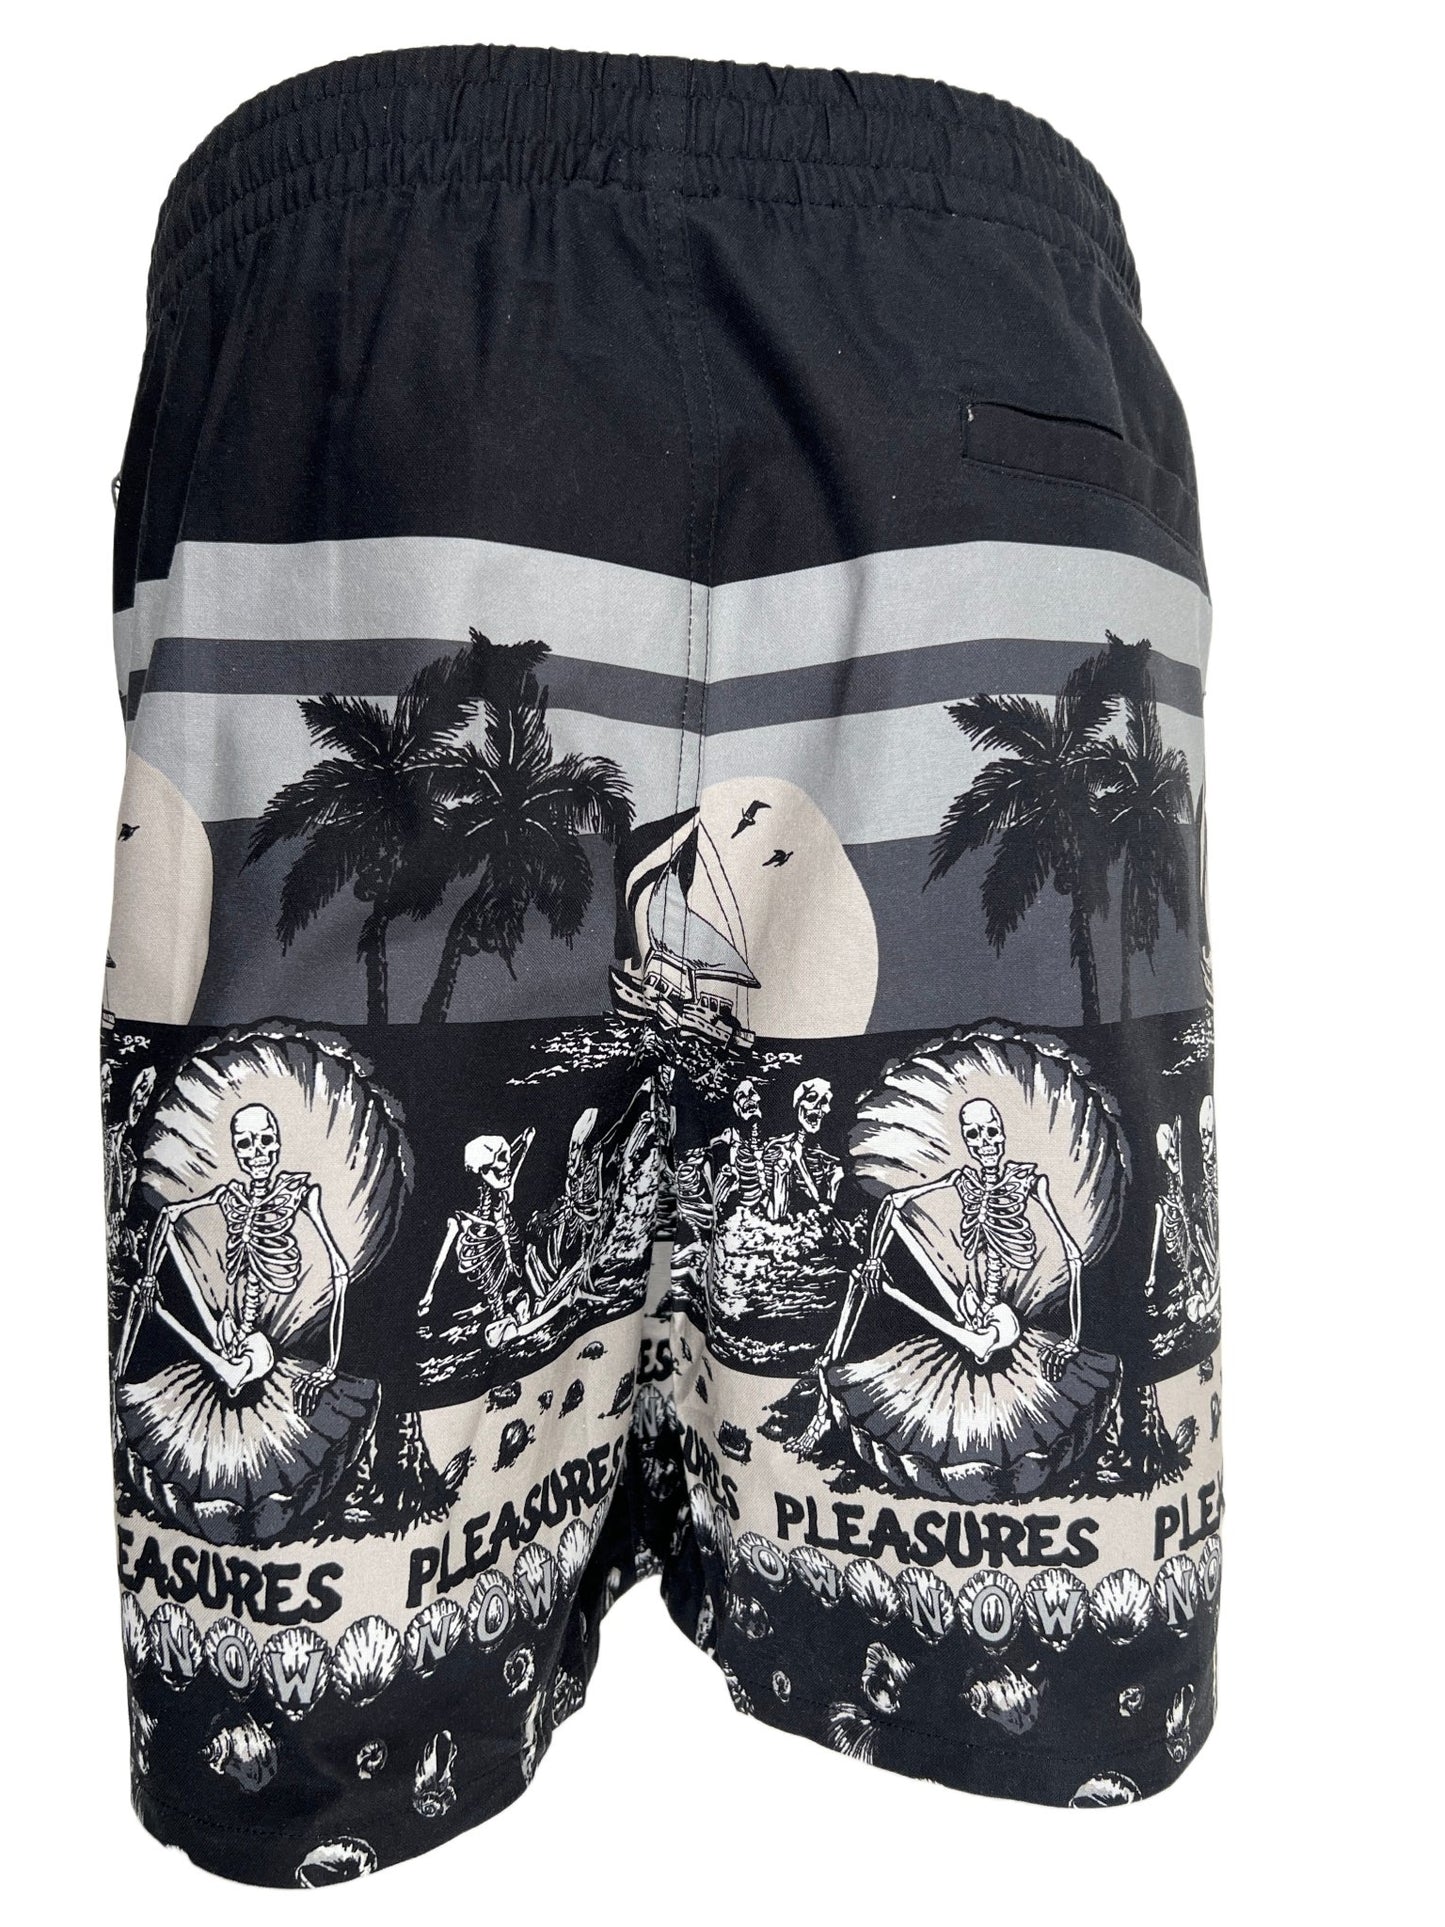 A black cotton swim trunk with palm trees and palm trees on it, featuring a relaxed fit, like the PLEASURES BEACH SHORT BLACK by PLEASURES.